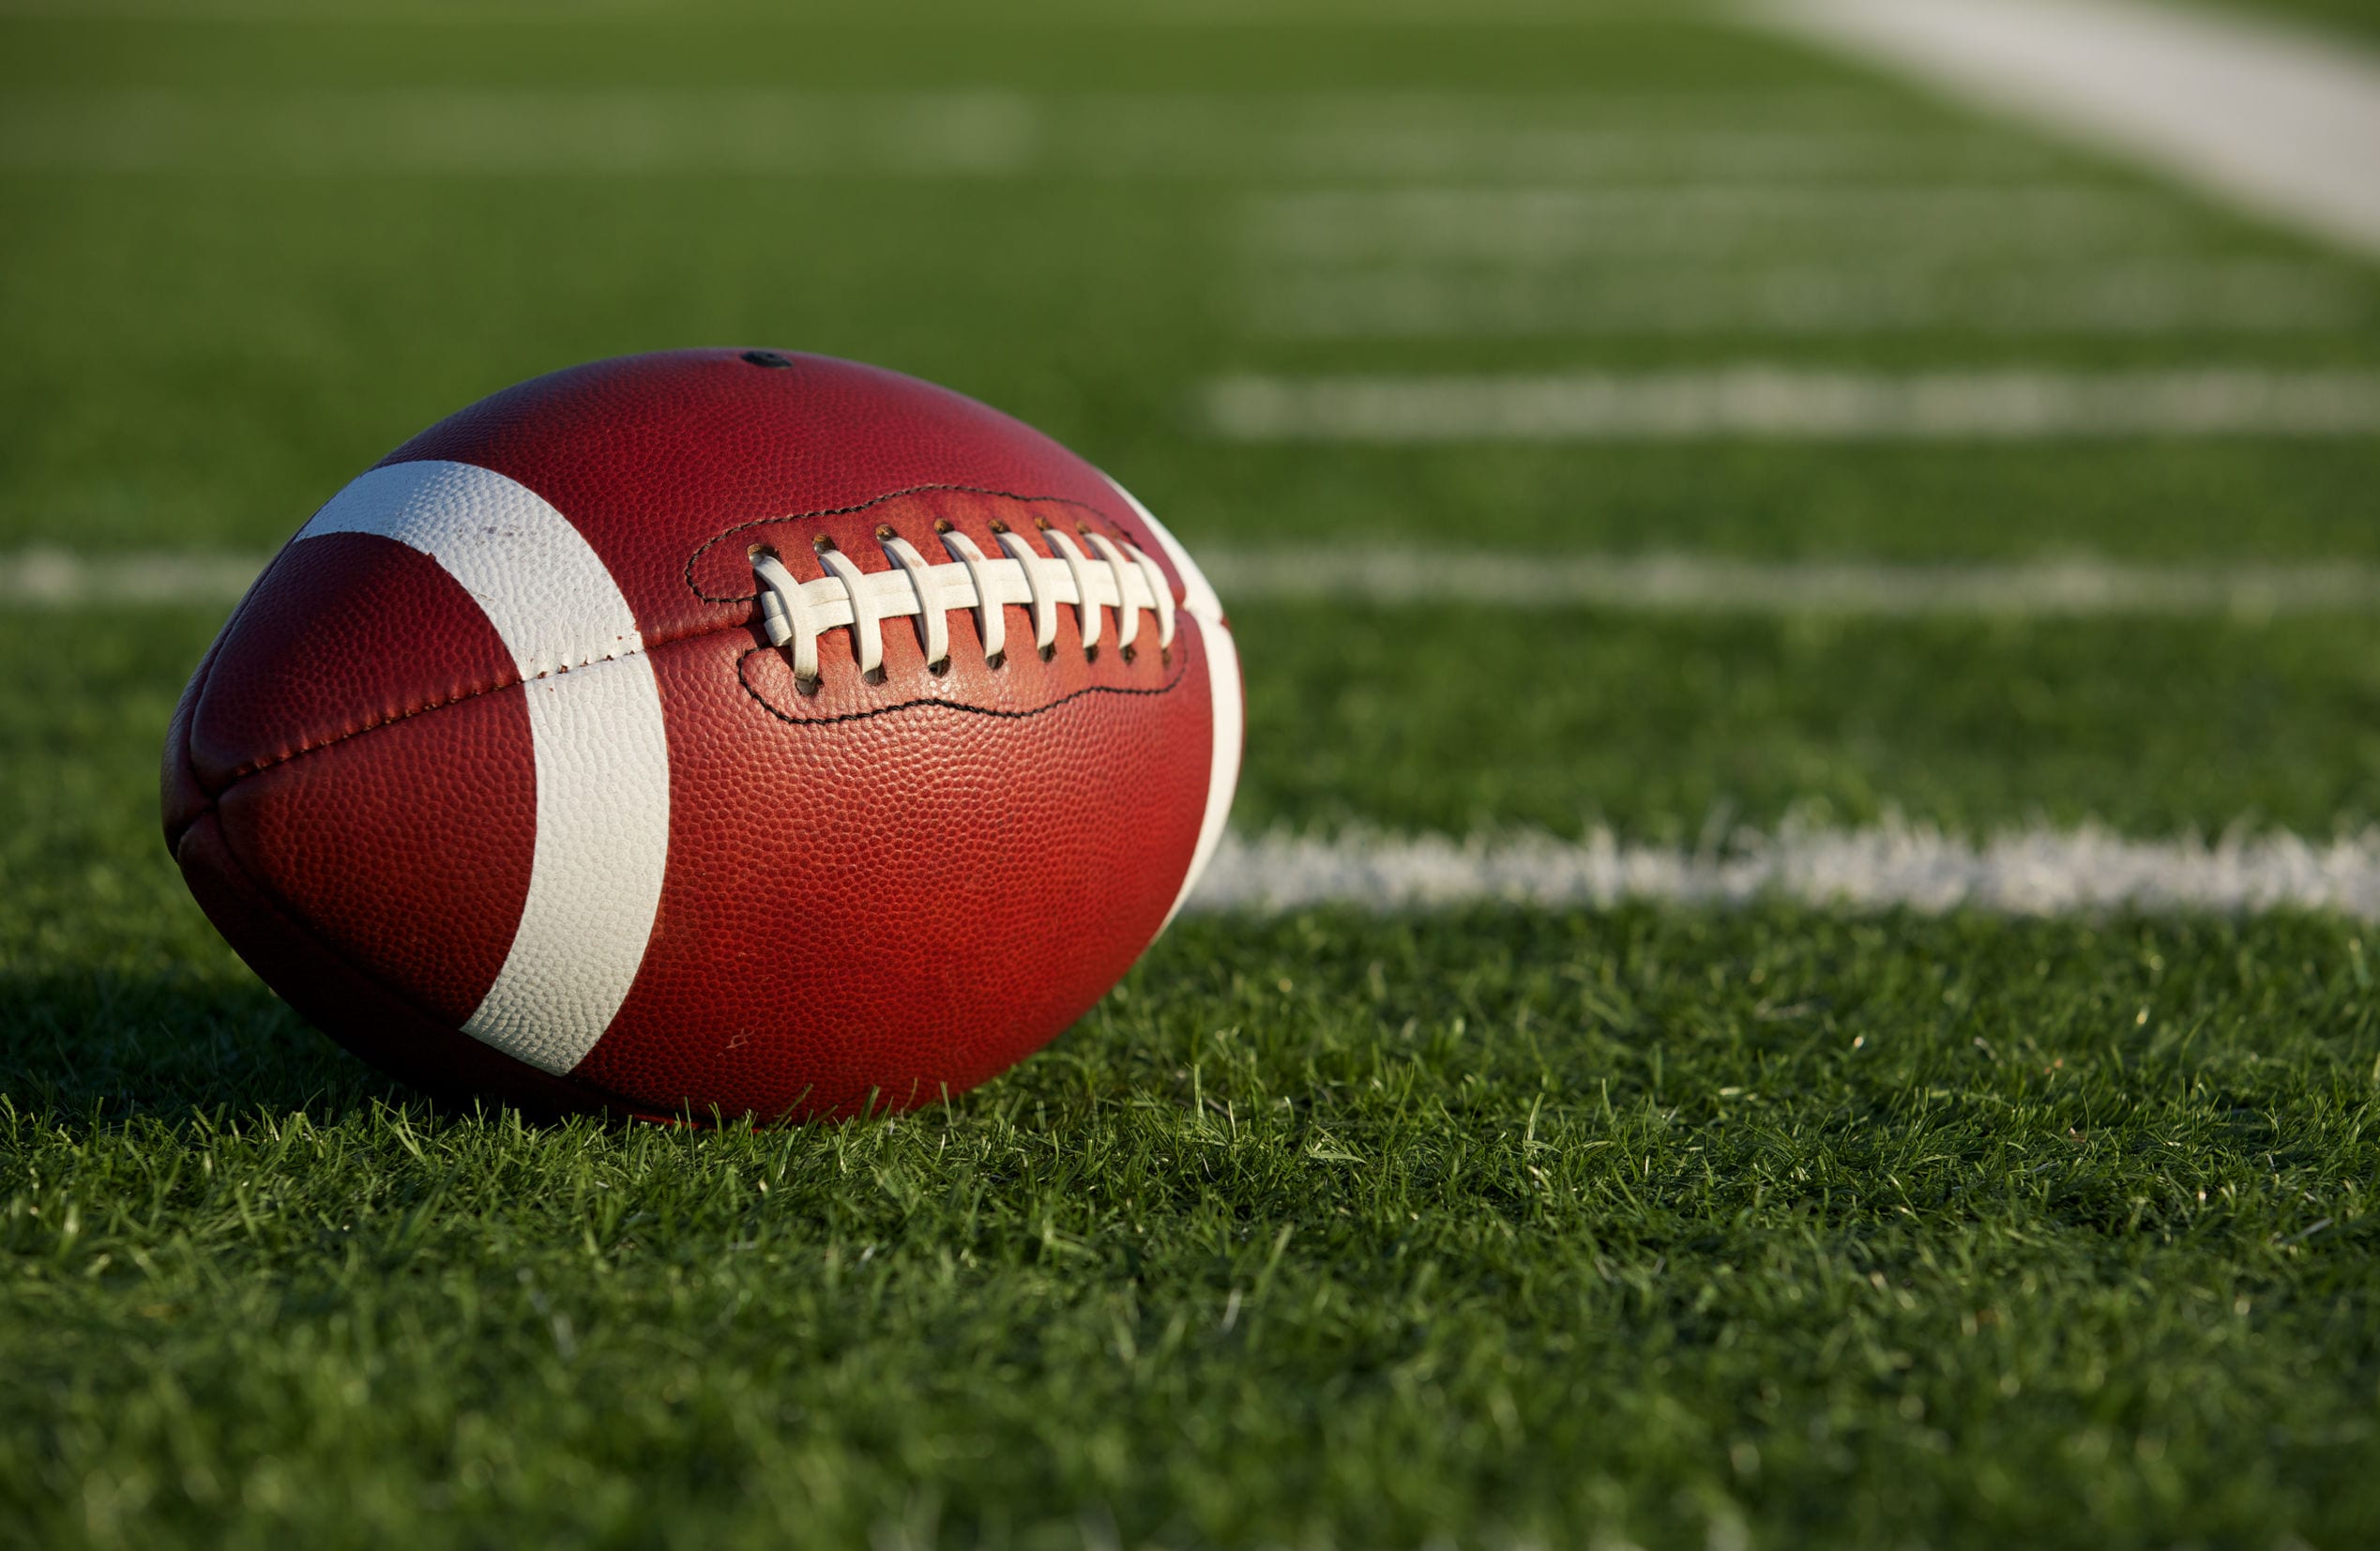 Injured Playing Football? Get Help from a Chiropractor